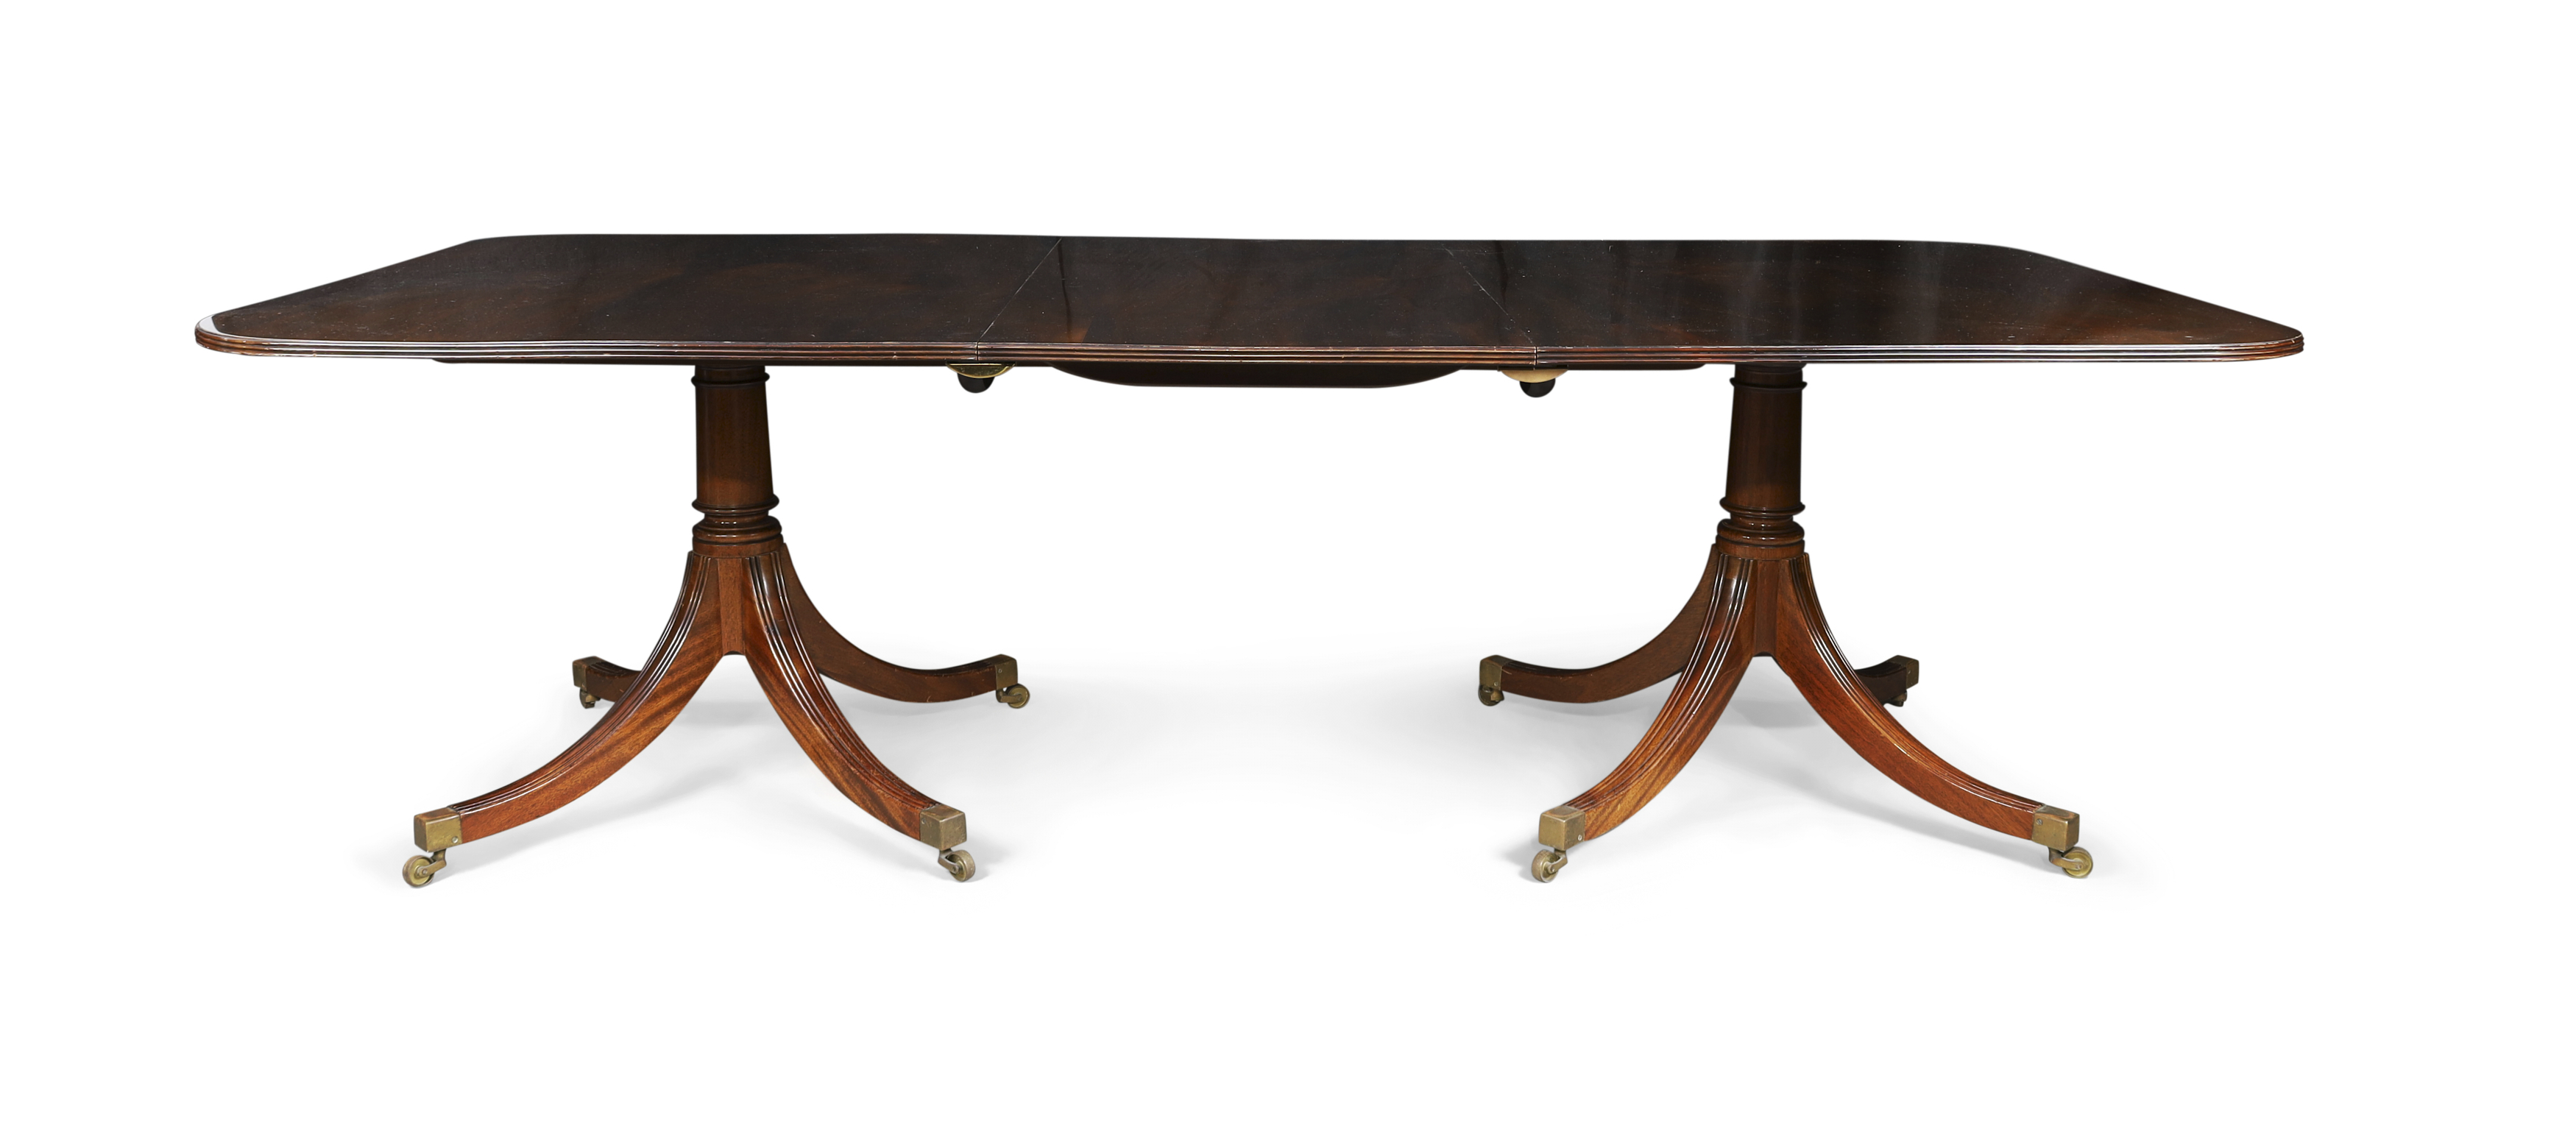 An English mahogany twin pedestal dining table by William Tillman, George III style, 20th century... - Image 2 of 3